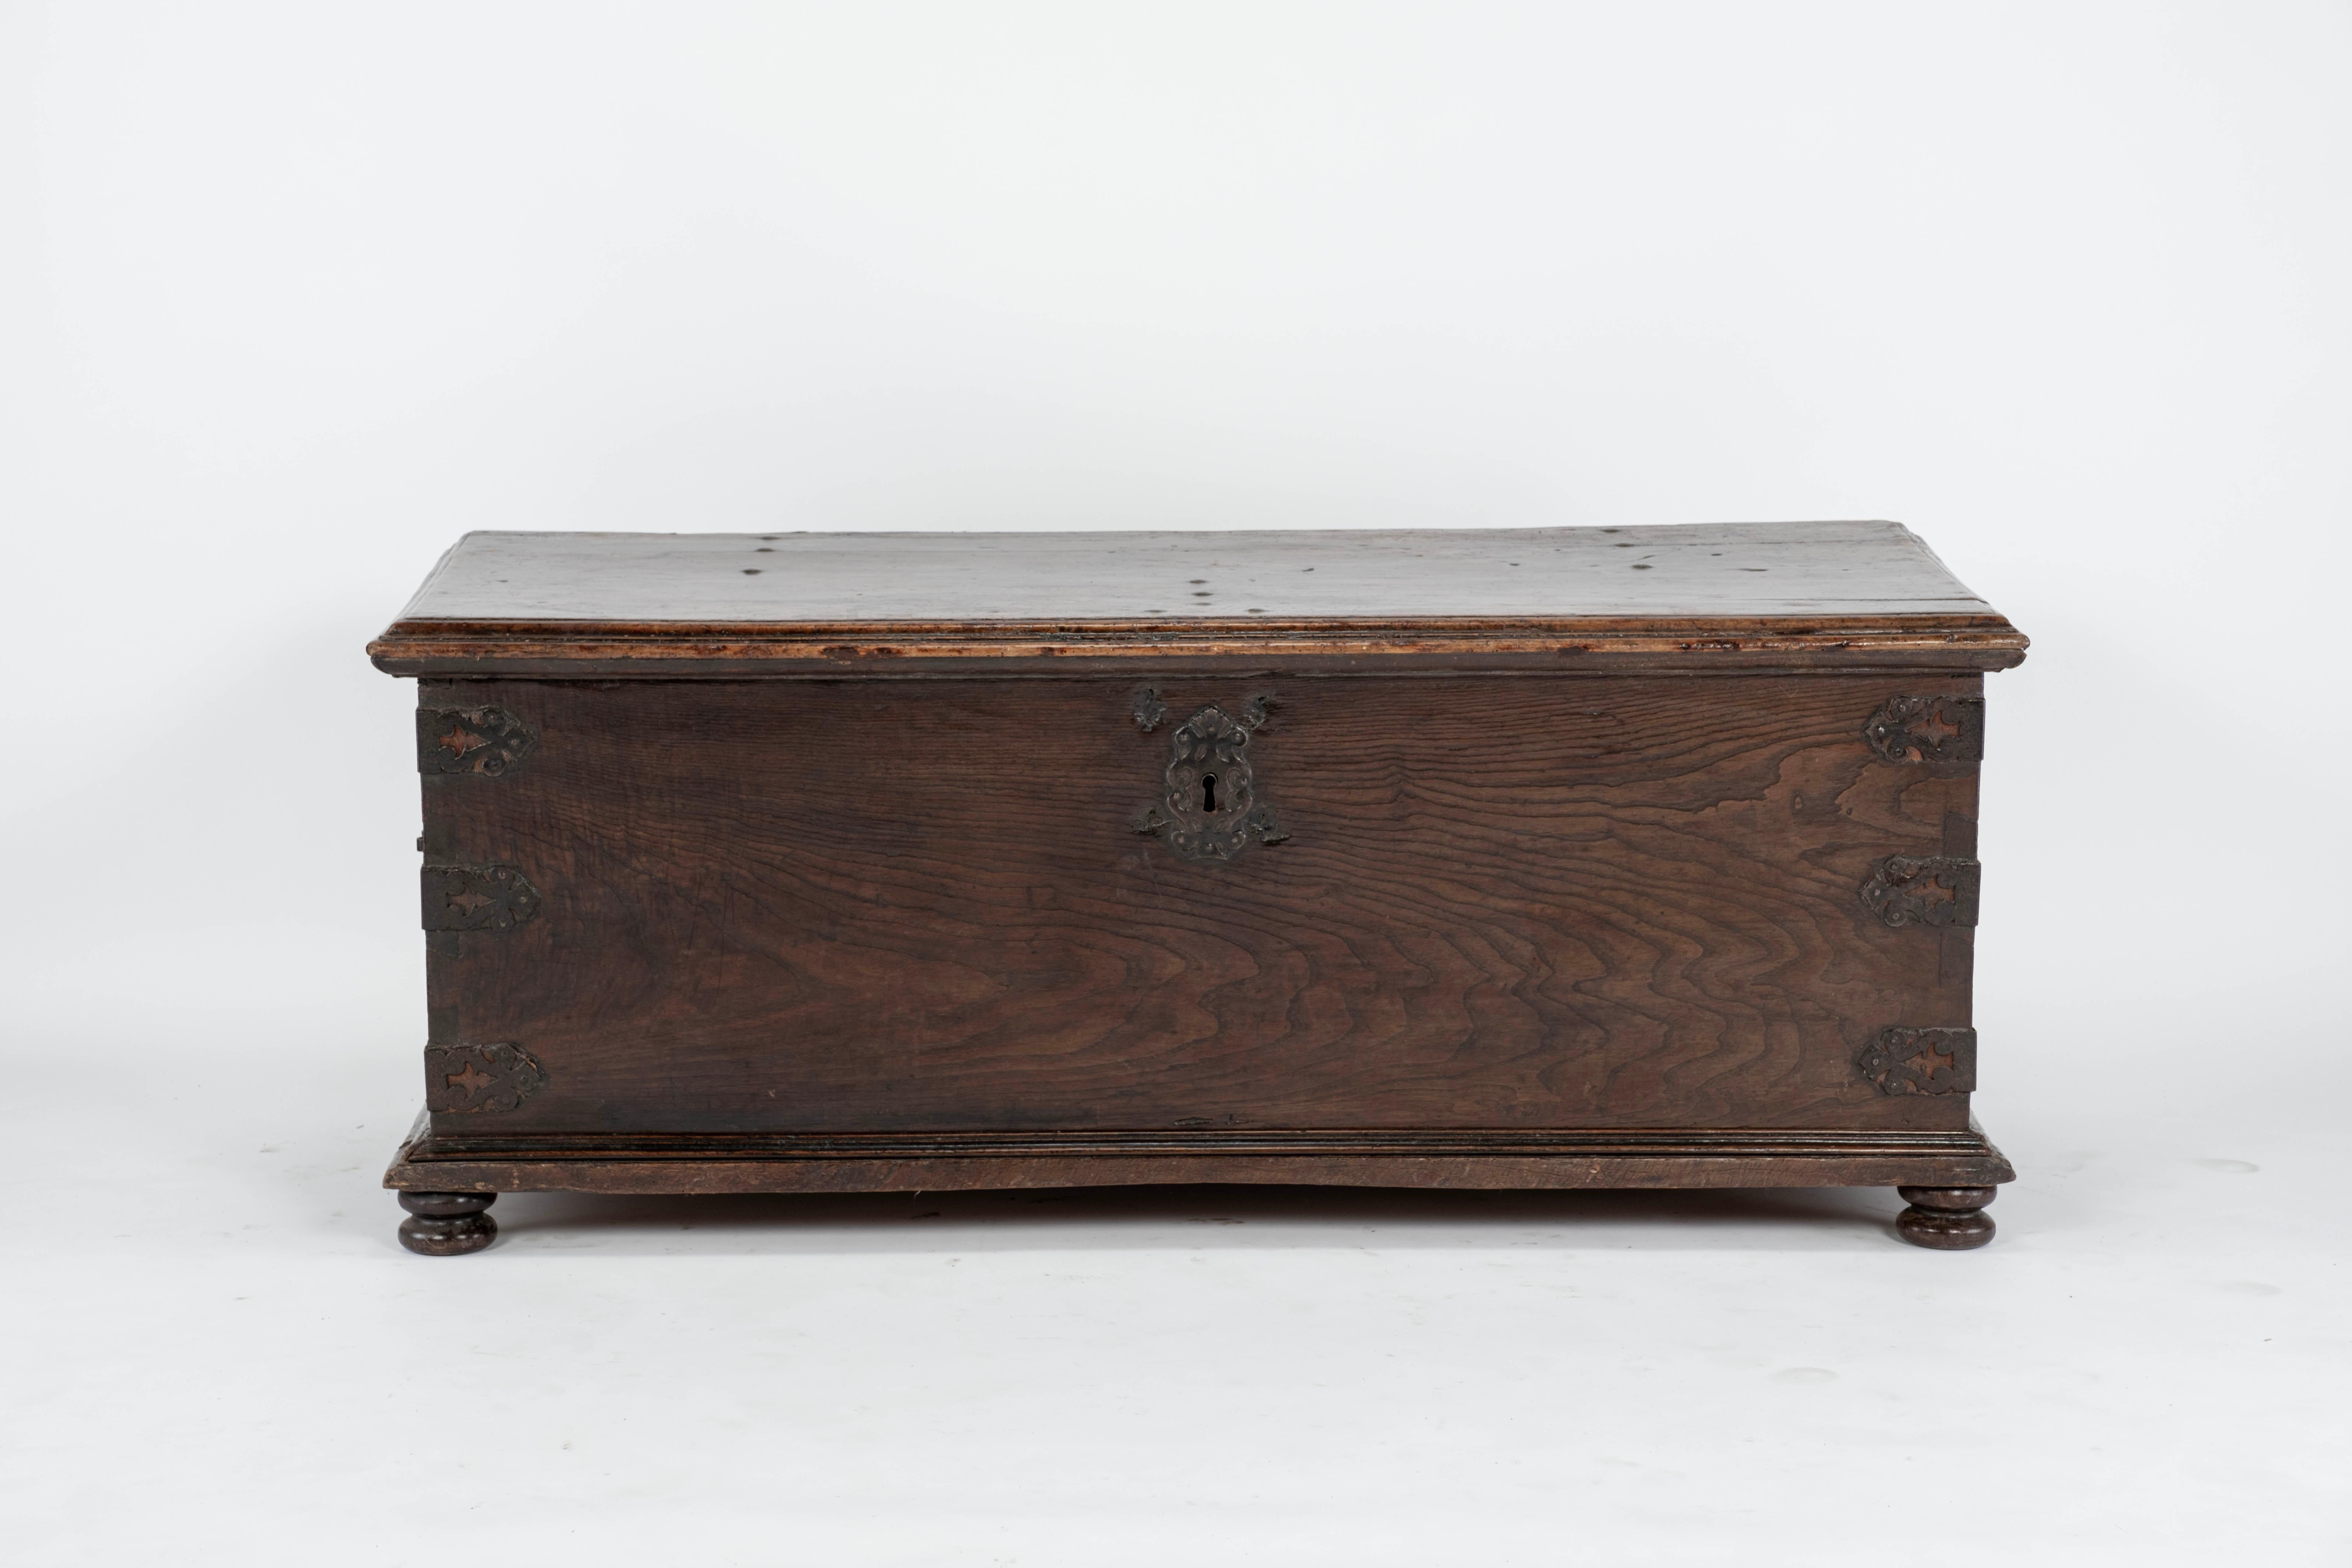 Beautiful walnut trunk with original hardware and key. Spectacular patina and single planks used in sides and top. Hard to find pieces like these.